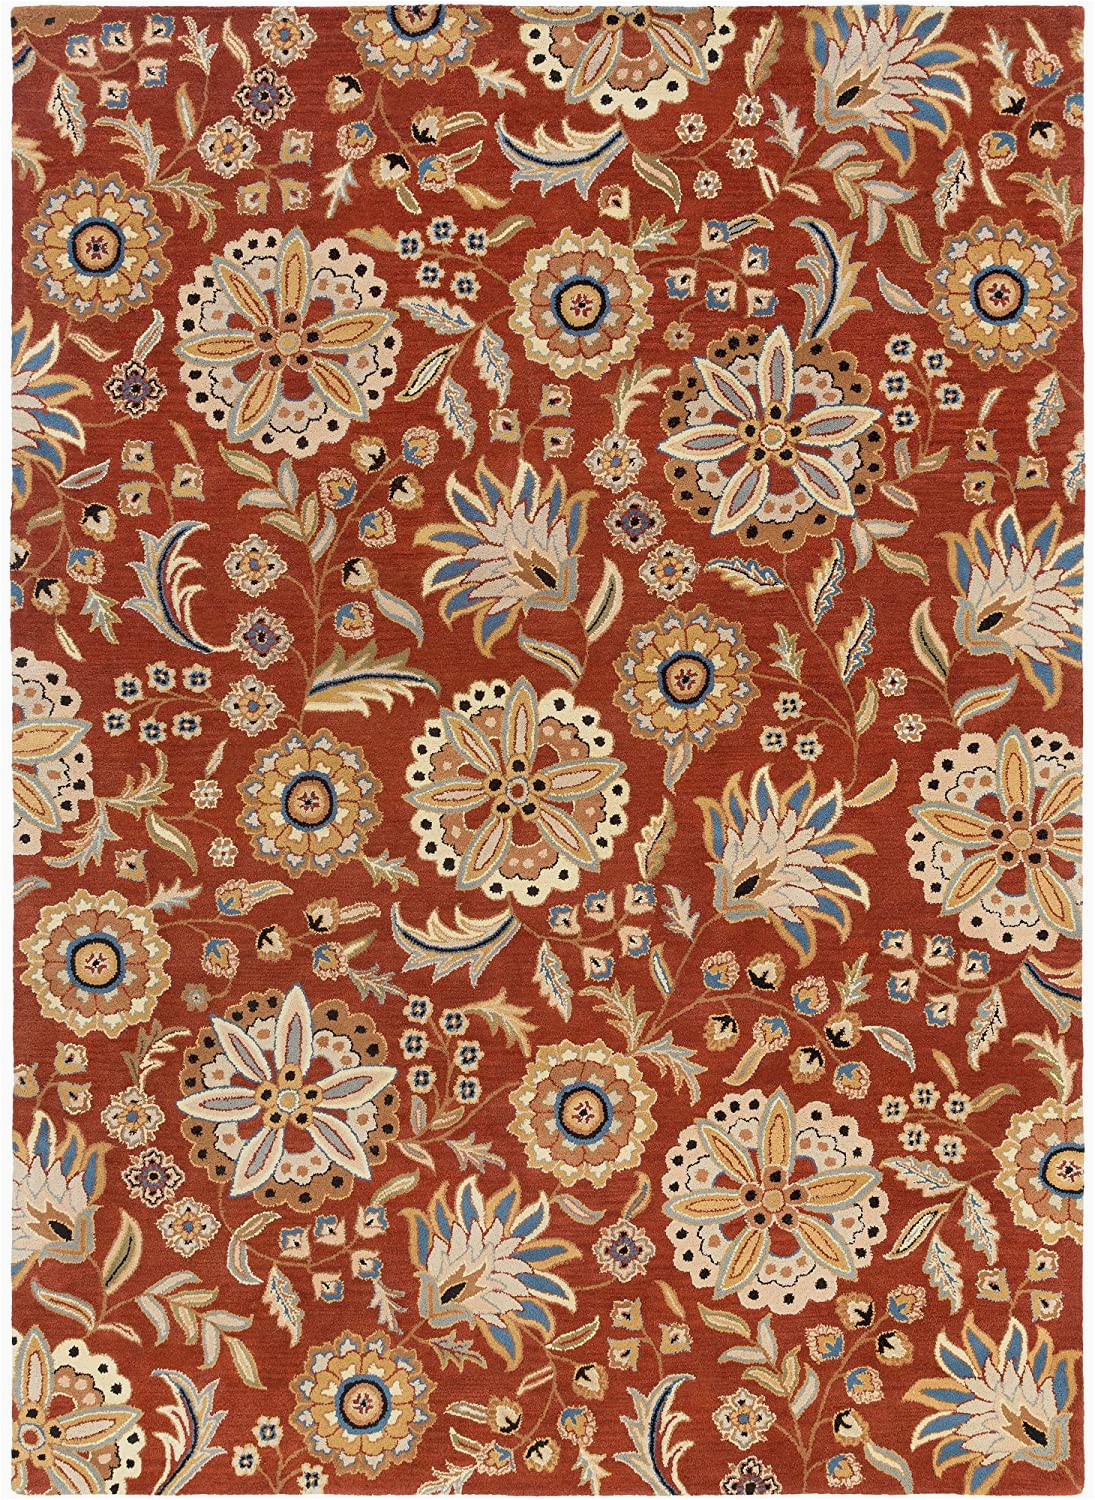 Athena Garden Floral area Rugs Surya athena ath 5127 Hand Tufted Wool Floral and Paisley